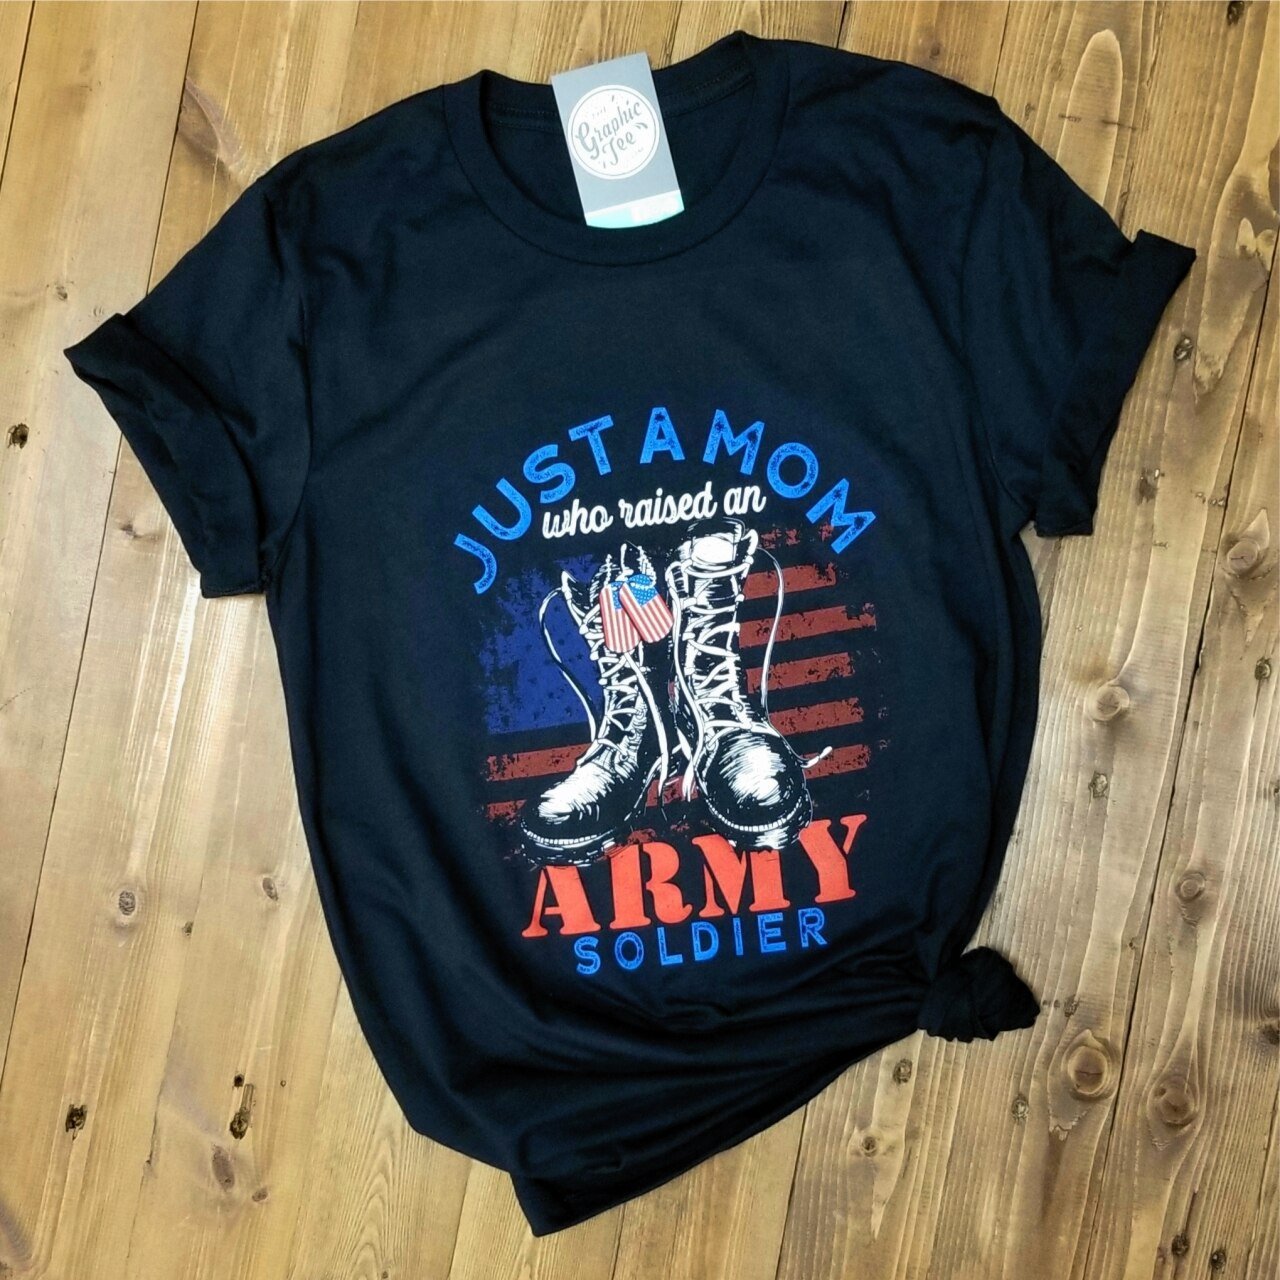 Just A Mom Who Raised an Army Soldier - Black Tee - The Graphic Tee